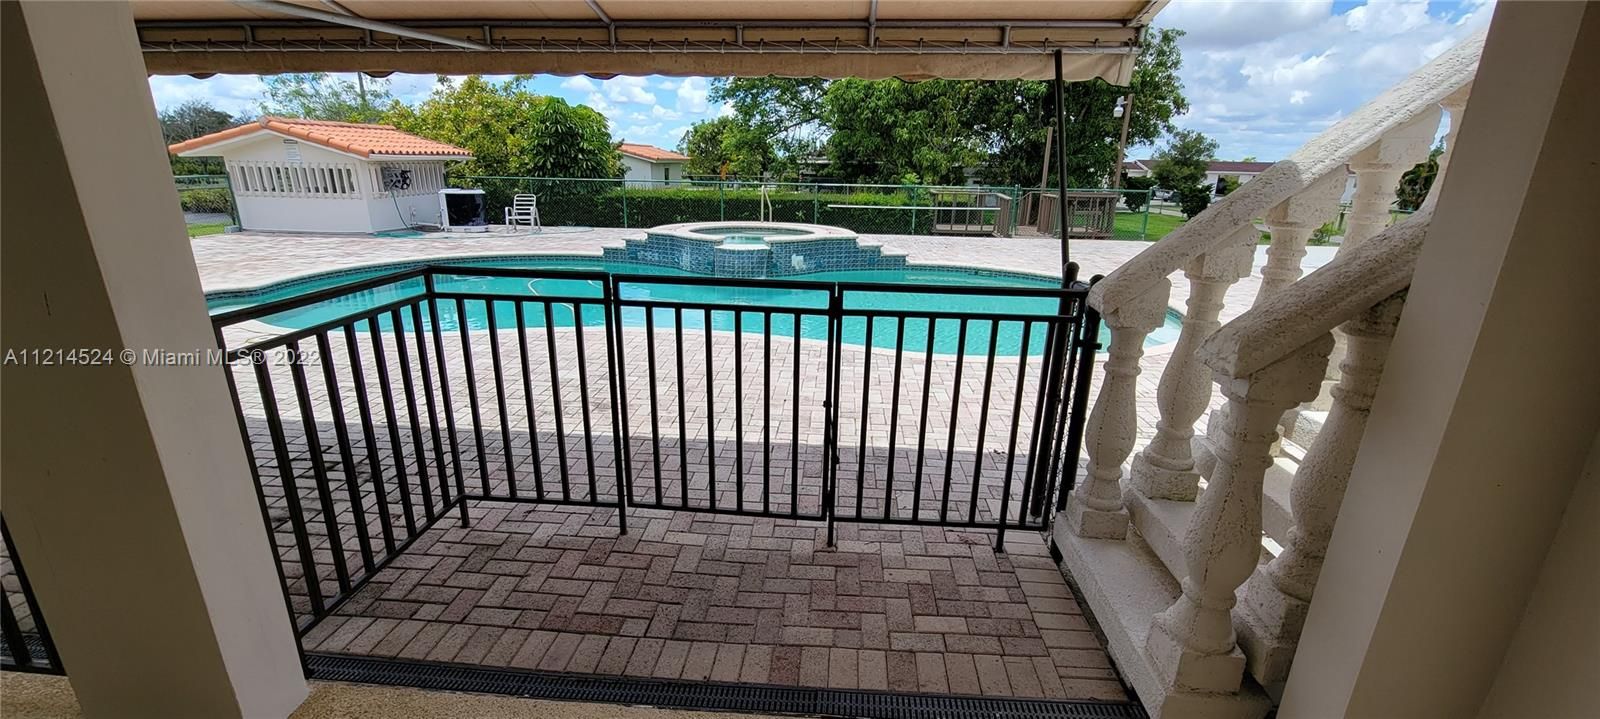 Covered patio overlooking pool/spa deck and stairway to Master suite balcony patio